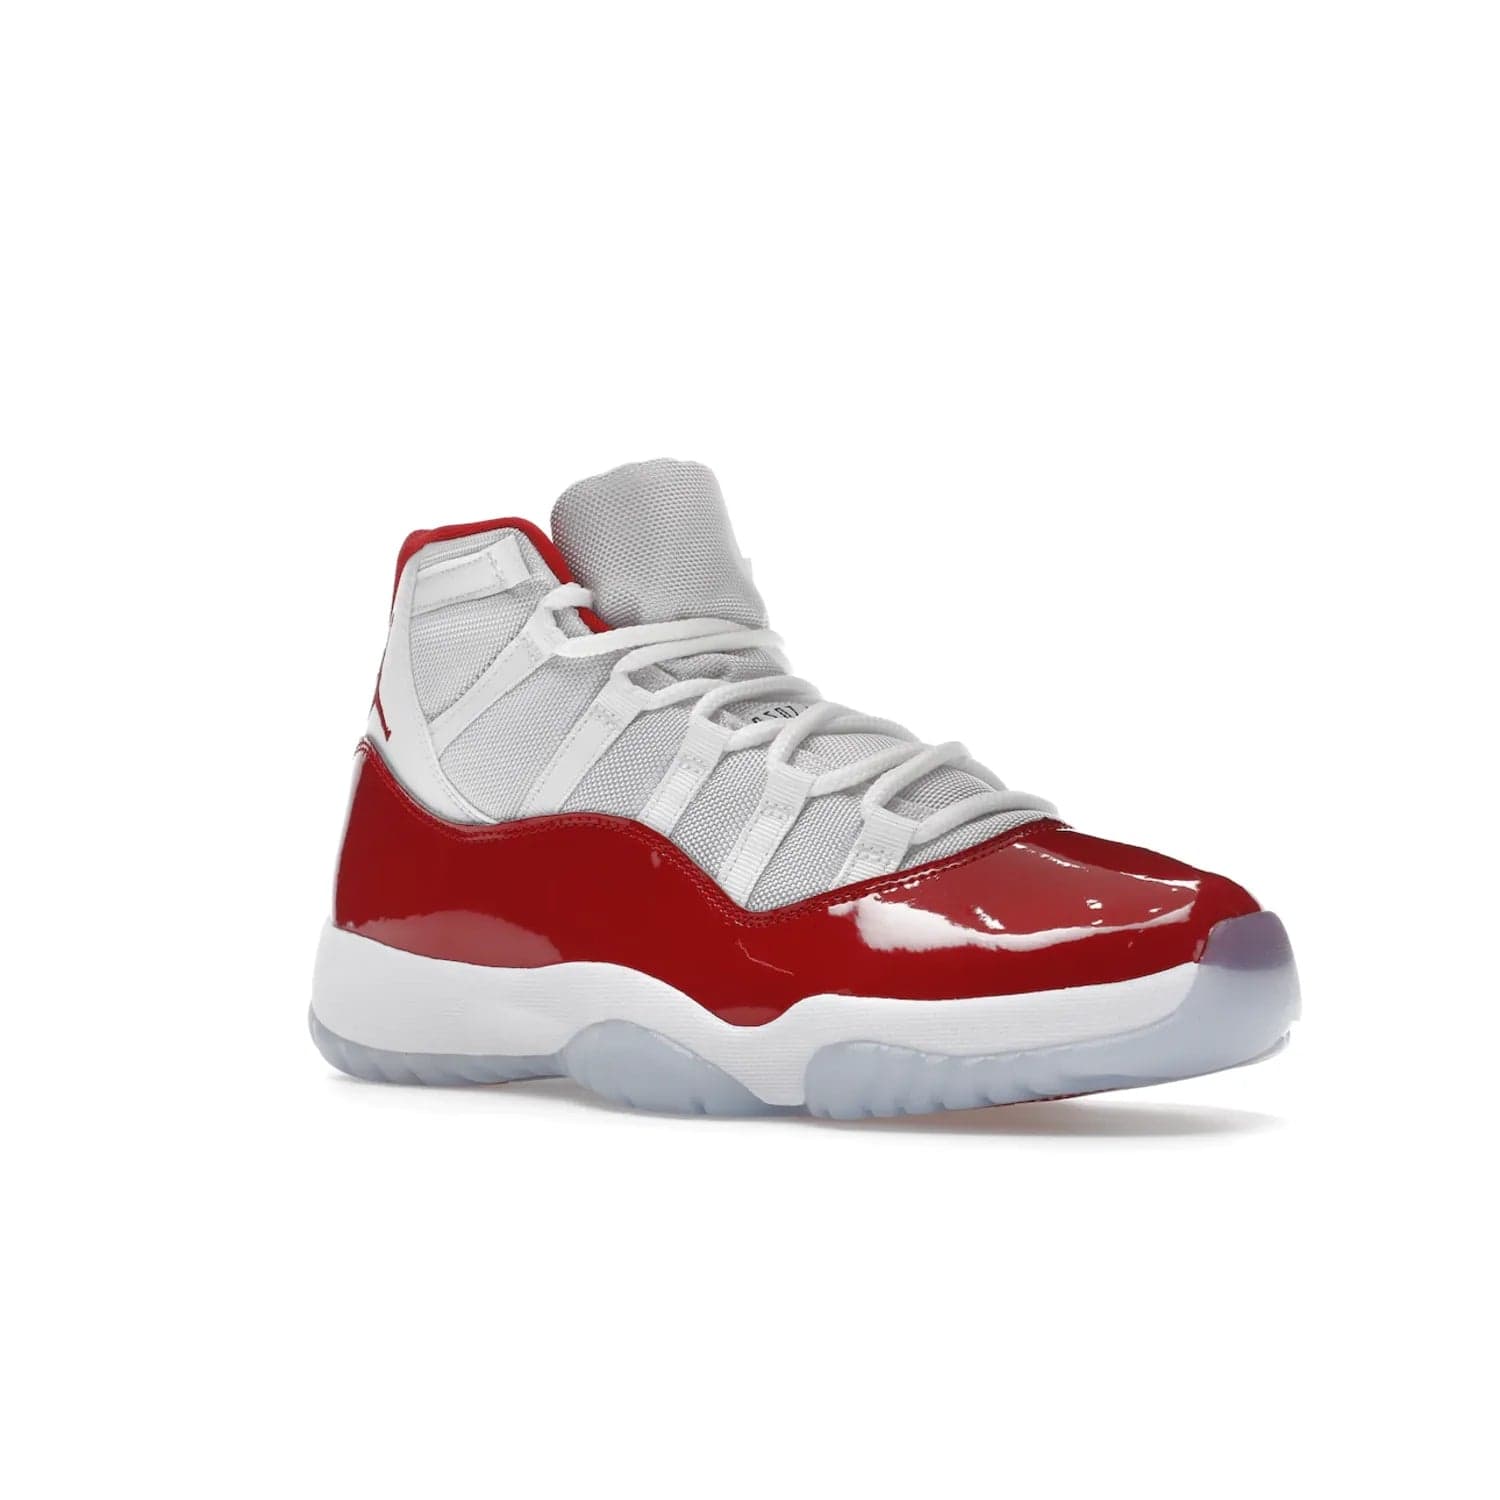 Jordan 11 Retro Cherry (2022) - Image 5 - Only at www.BallersClubKickz.com - The Air Jordan 11 Cherry features classic patent leather with Cherry red accents, icy blue outsole, and debossed 23 on the heel tab. Refresh your sneaker game with this iconic update, available December 10, 2022.